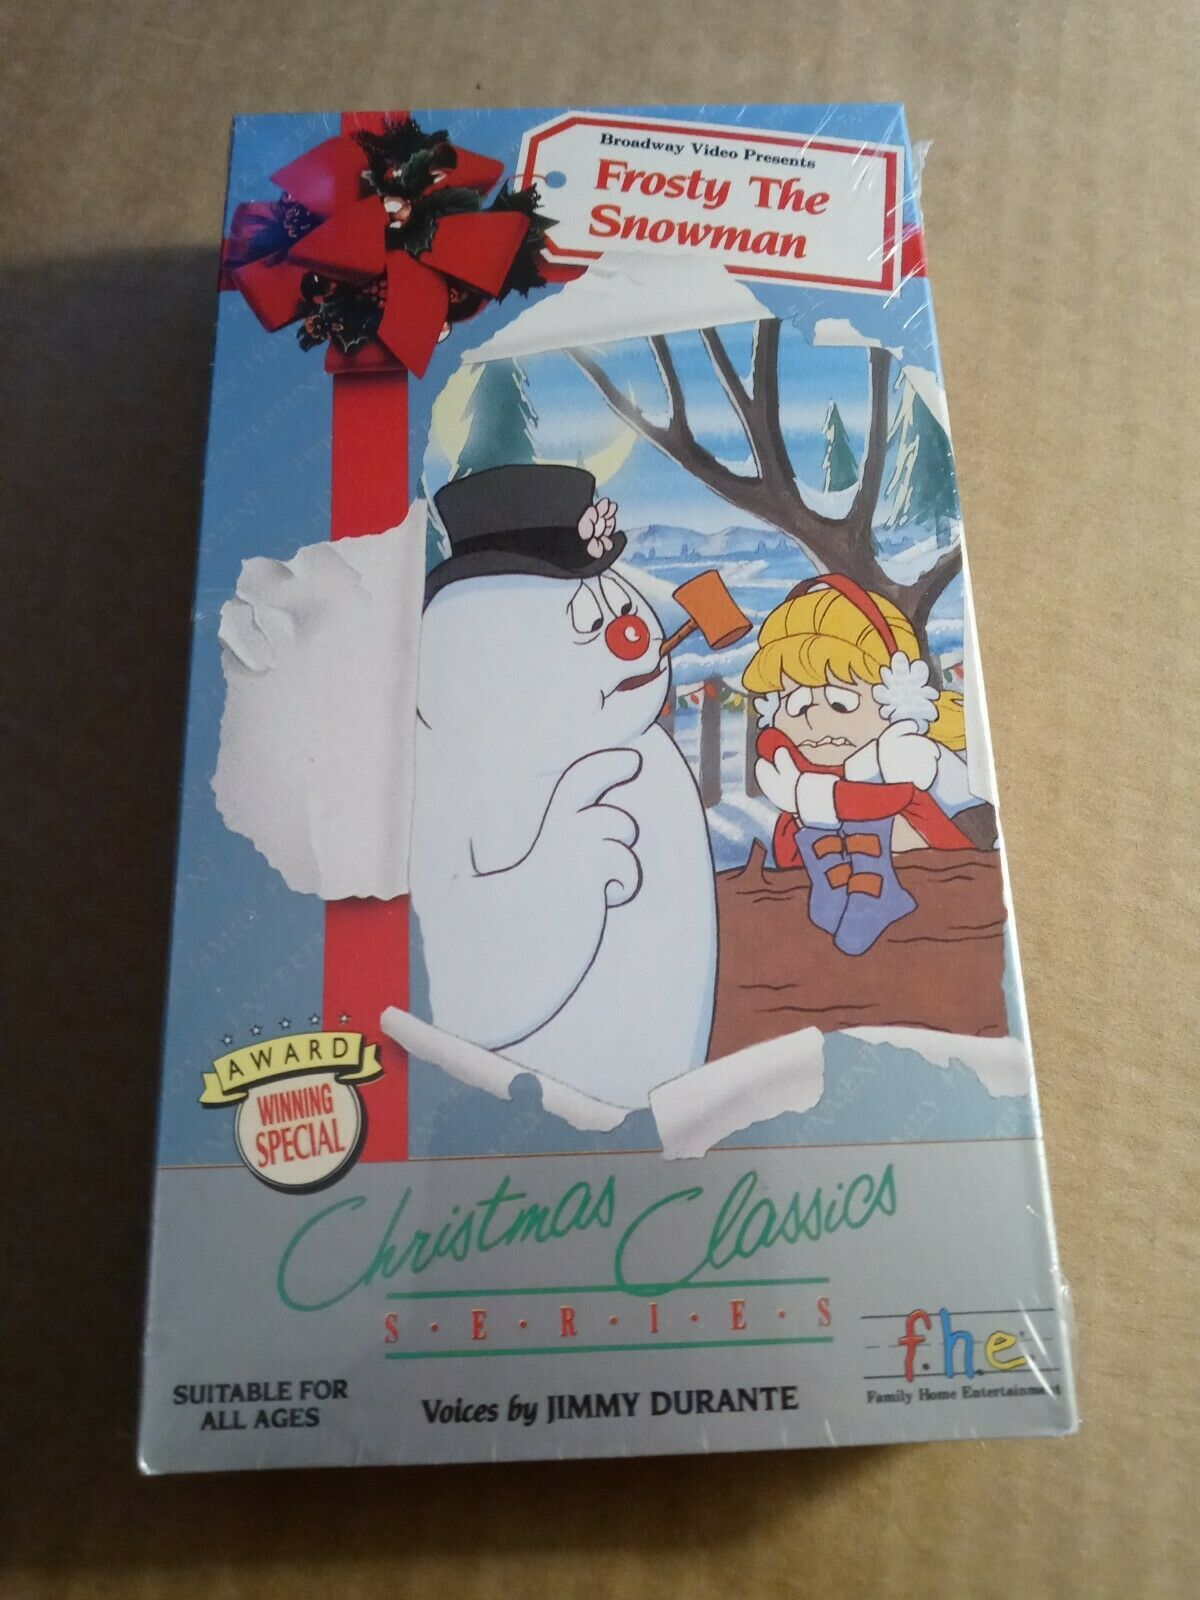 Frosty The Snowman VHS New - Broadway Video Presents SEALED - VHS Tapes